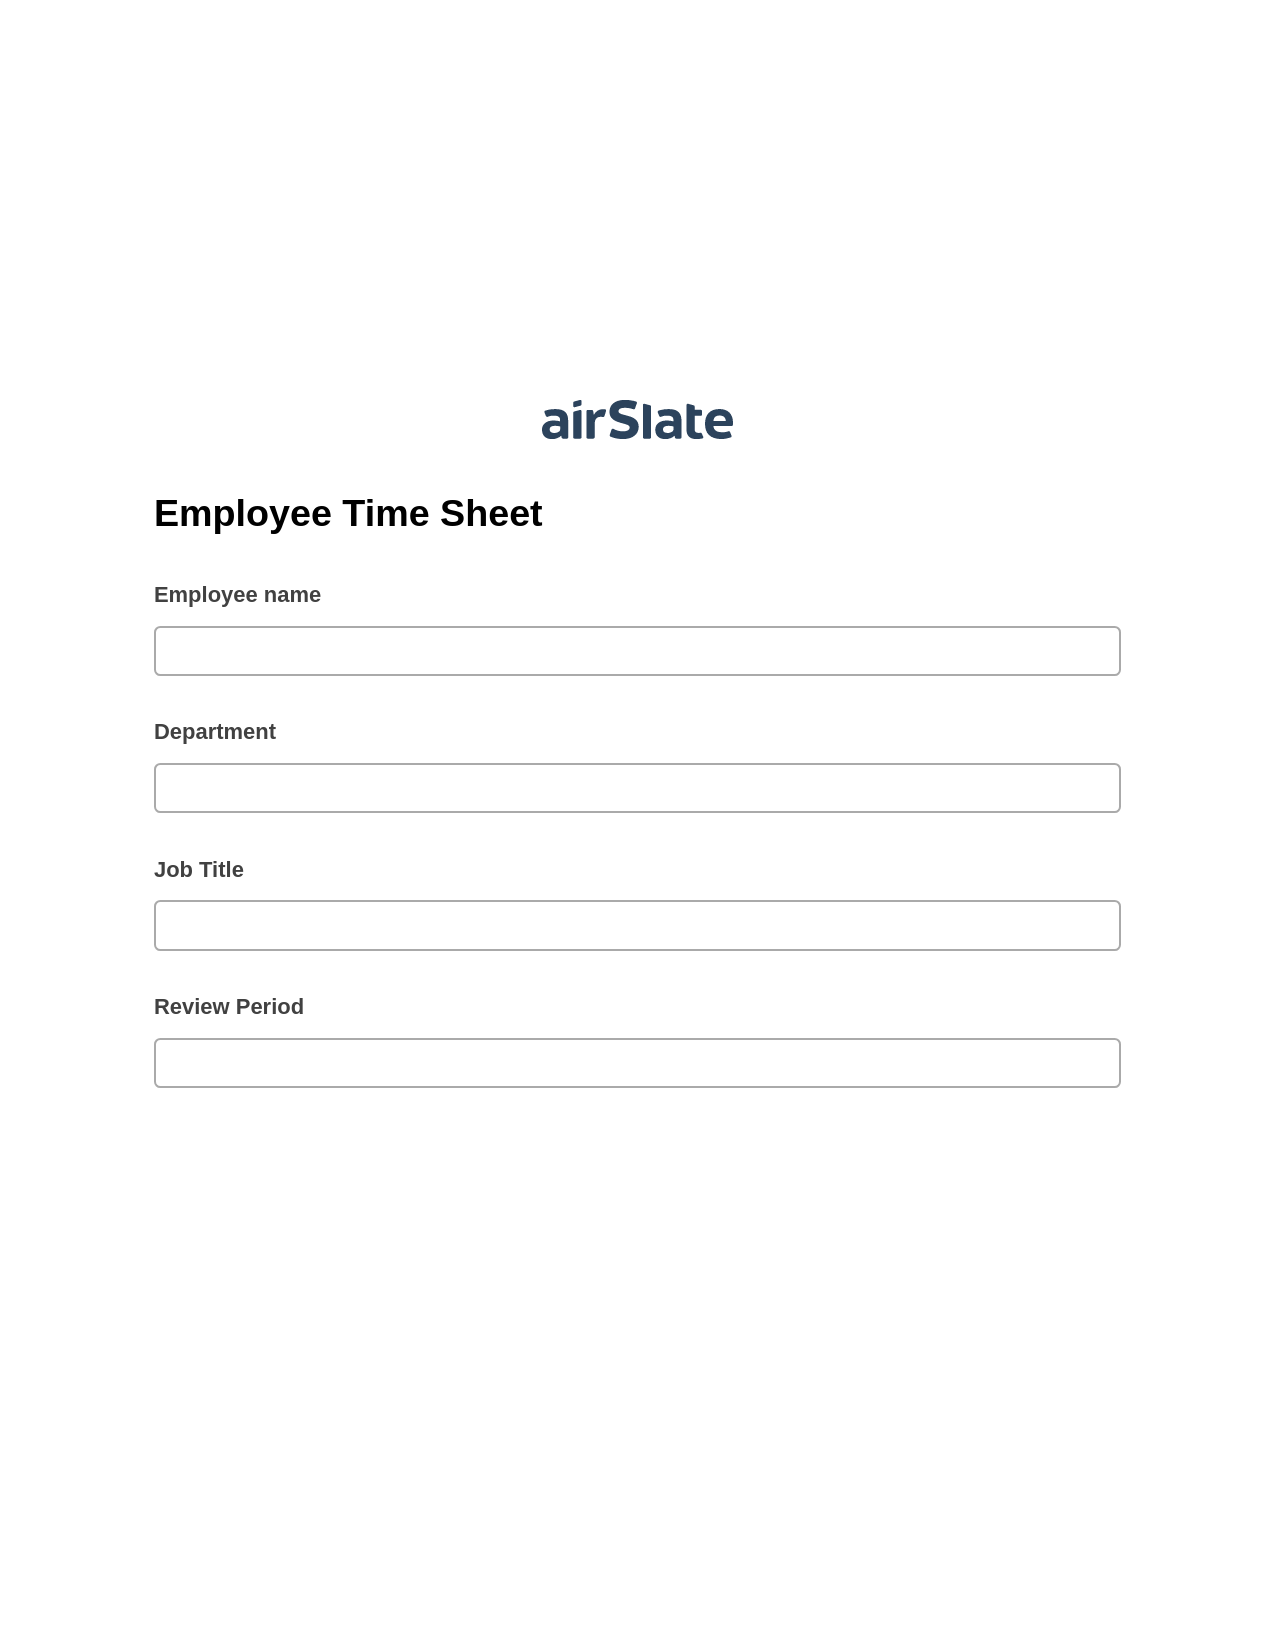 Employee Time Sheet Pre-fill Dropdowns from CSV file Bot, Reminder Bot, Export to Smartsheet